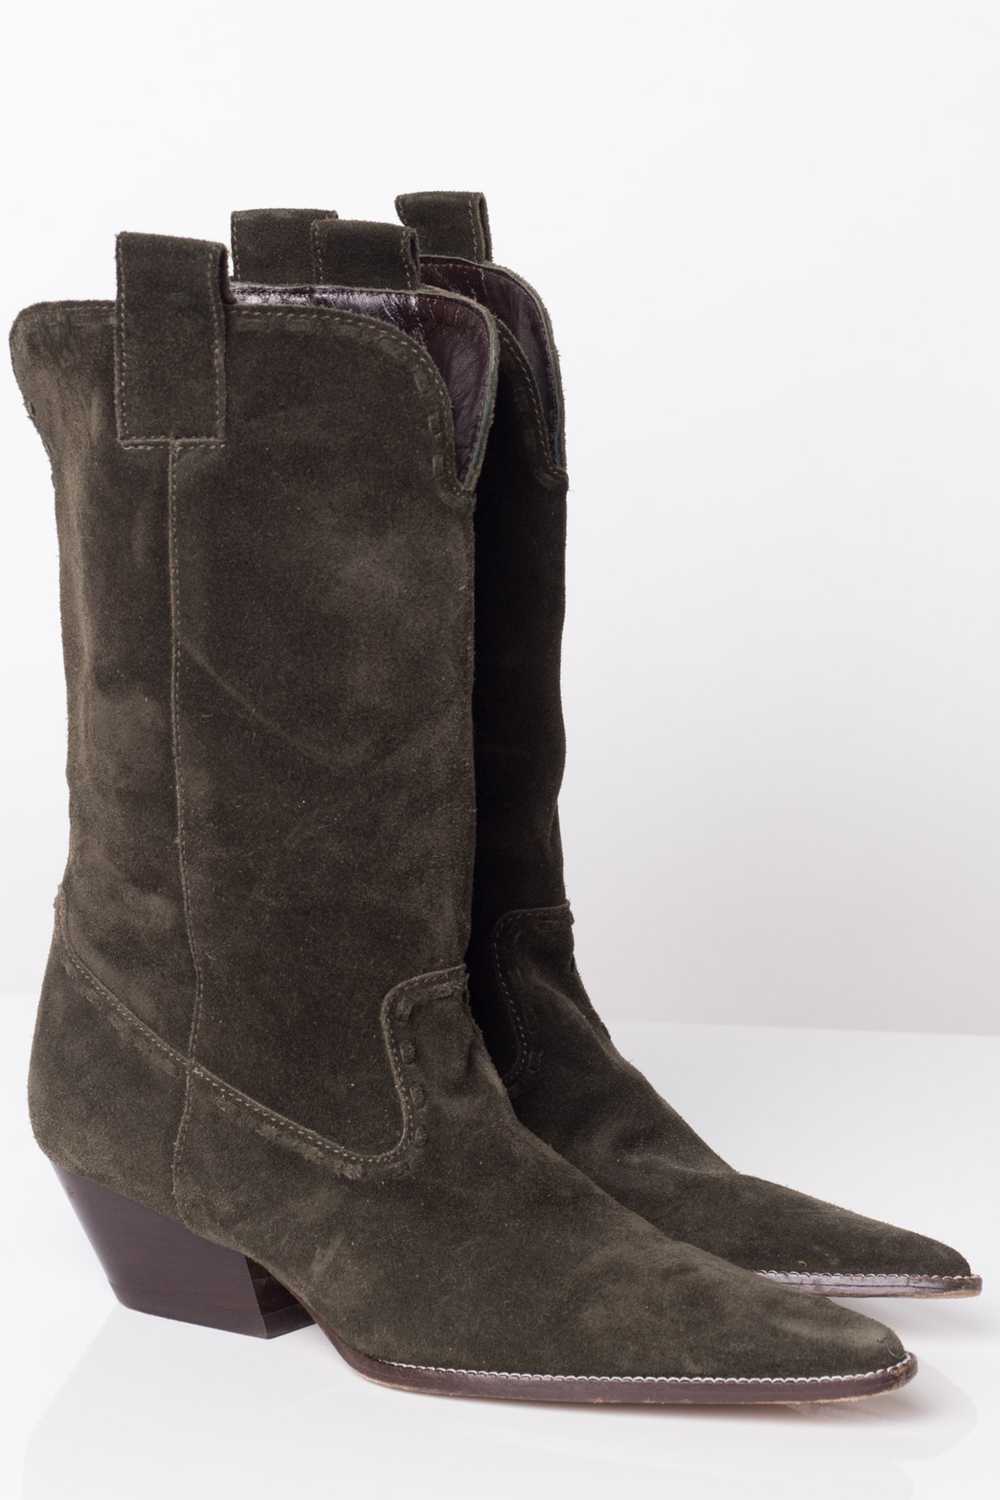 Michael Kors Green Suede Boots (6.5 M) - image 2